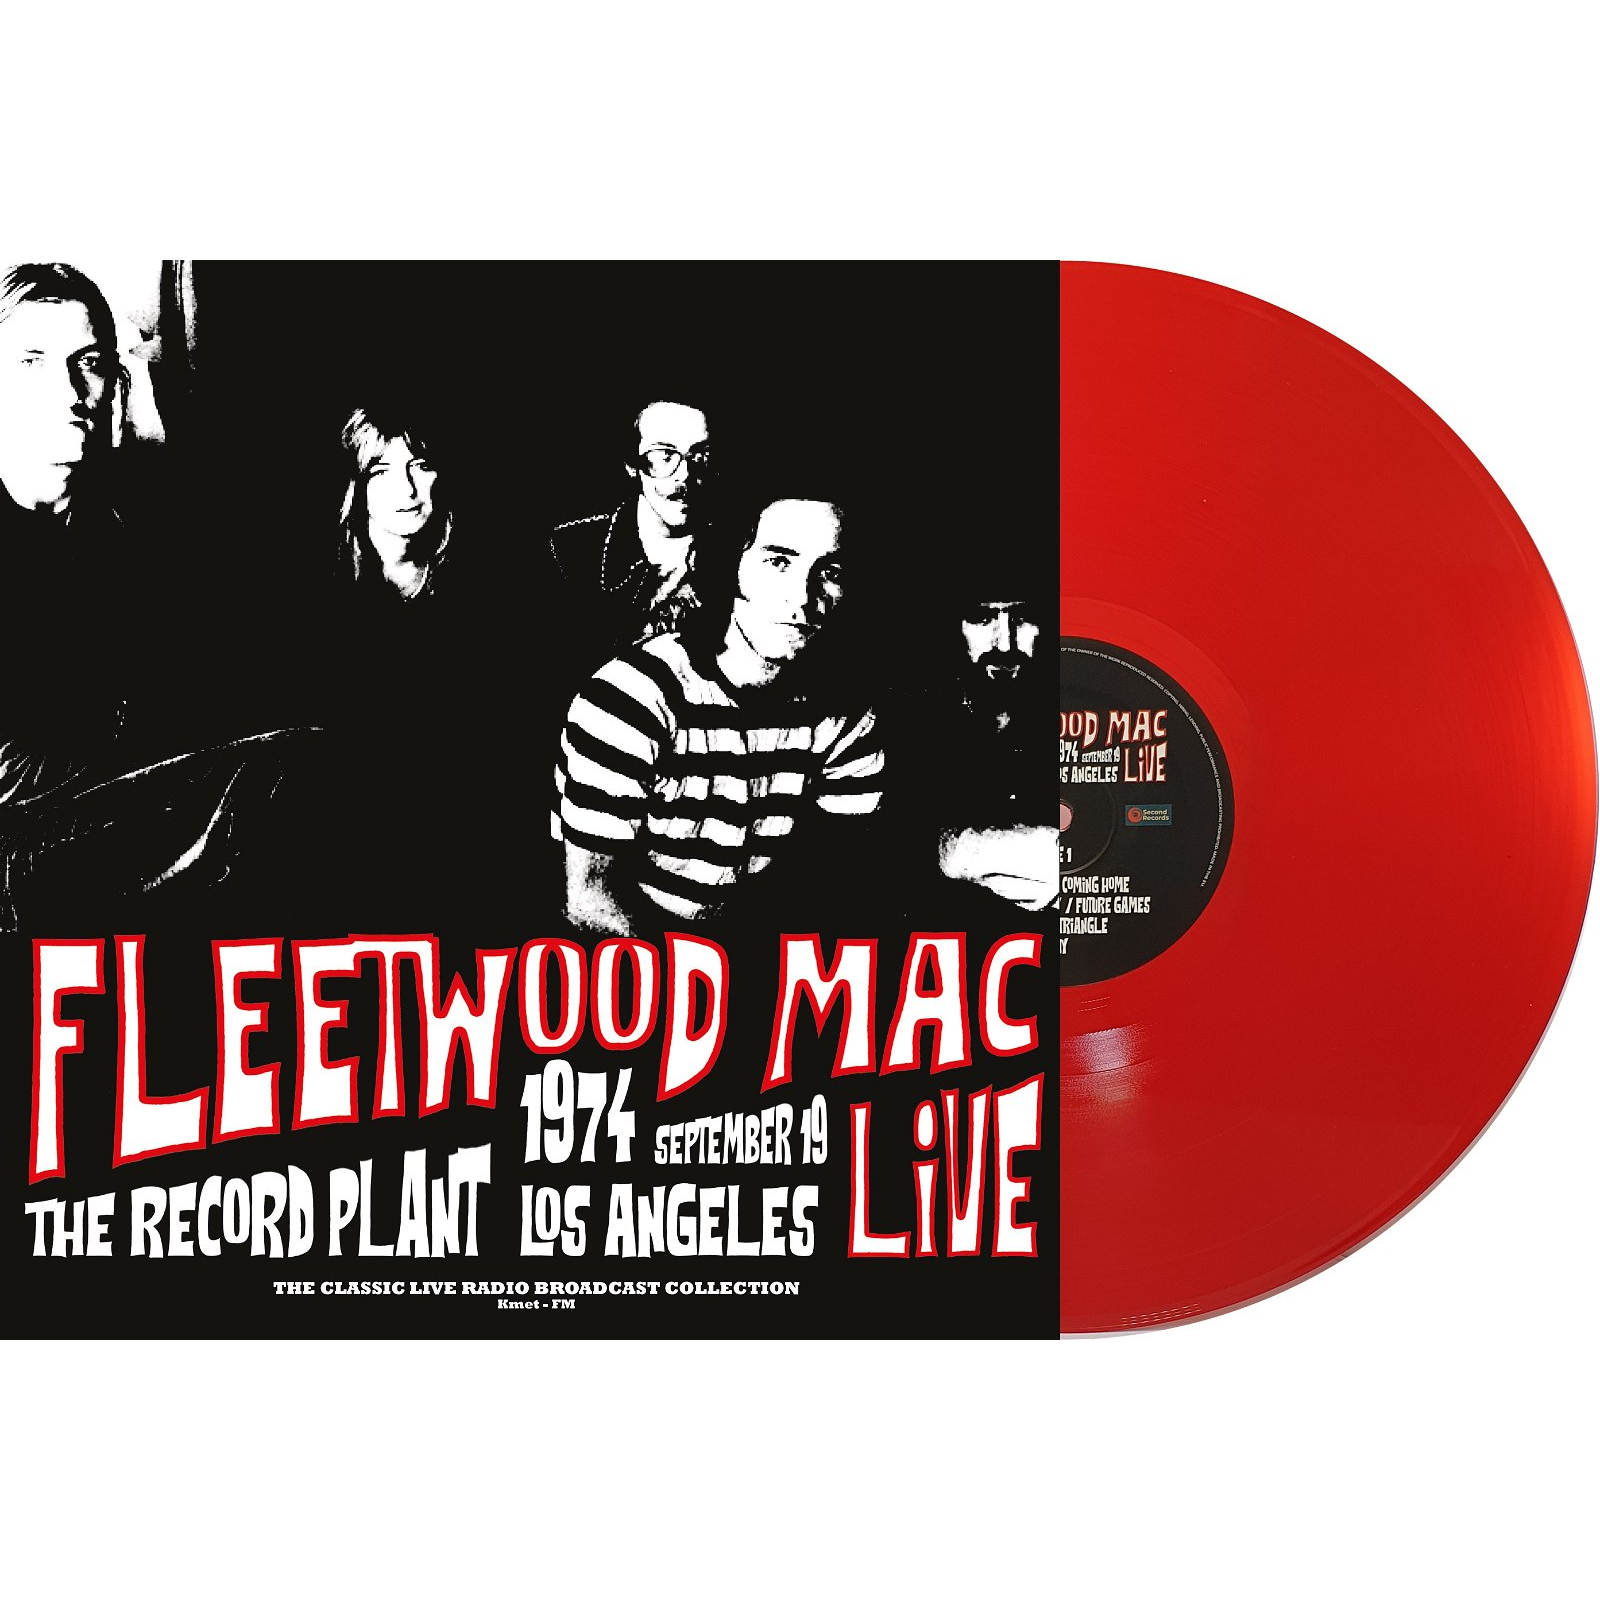 LIVE AT THE RECORD PLANT IN LOS ANGELES 19TH SEPTEMBER 1974 (COLOURED VINYL)